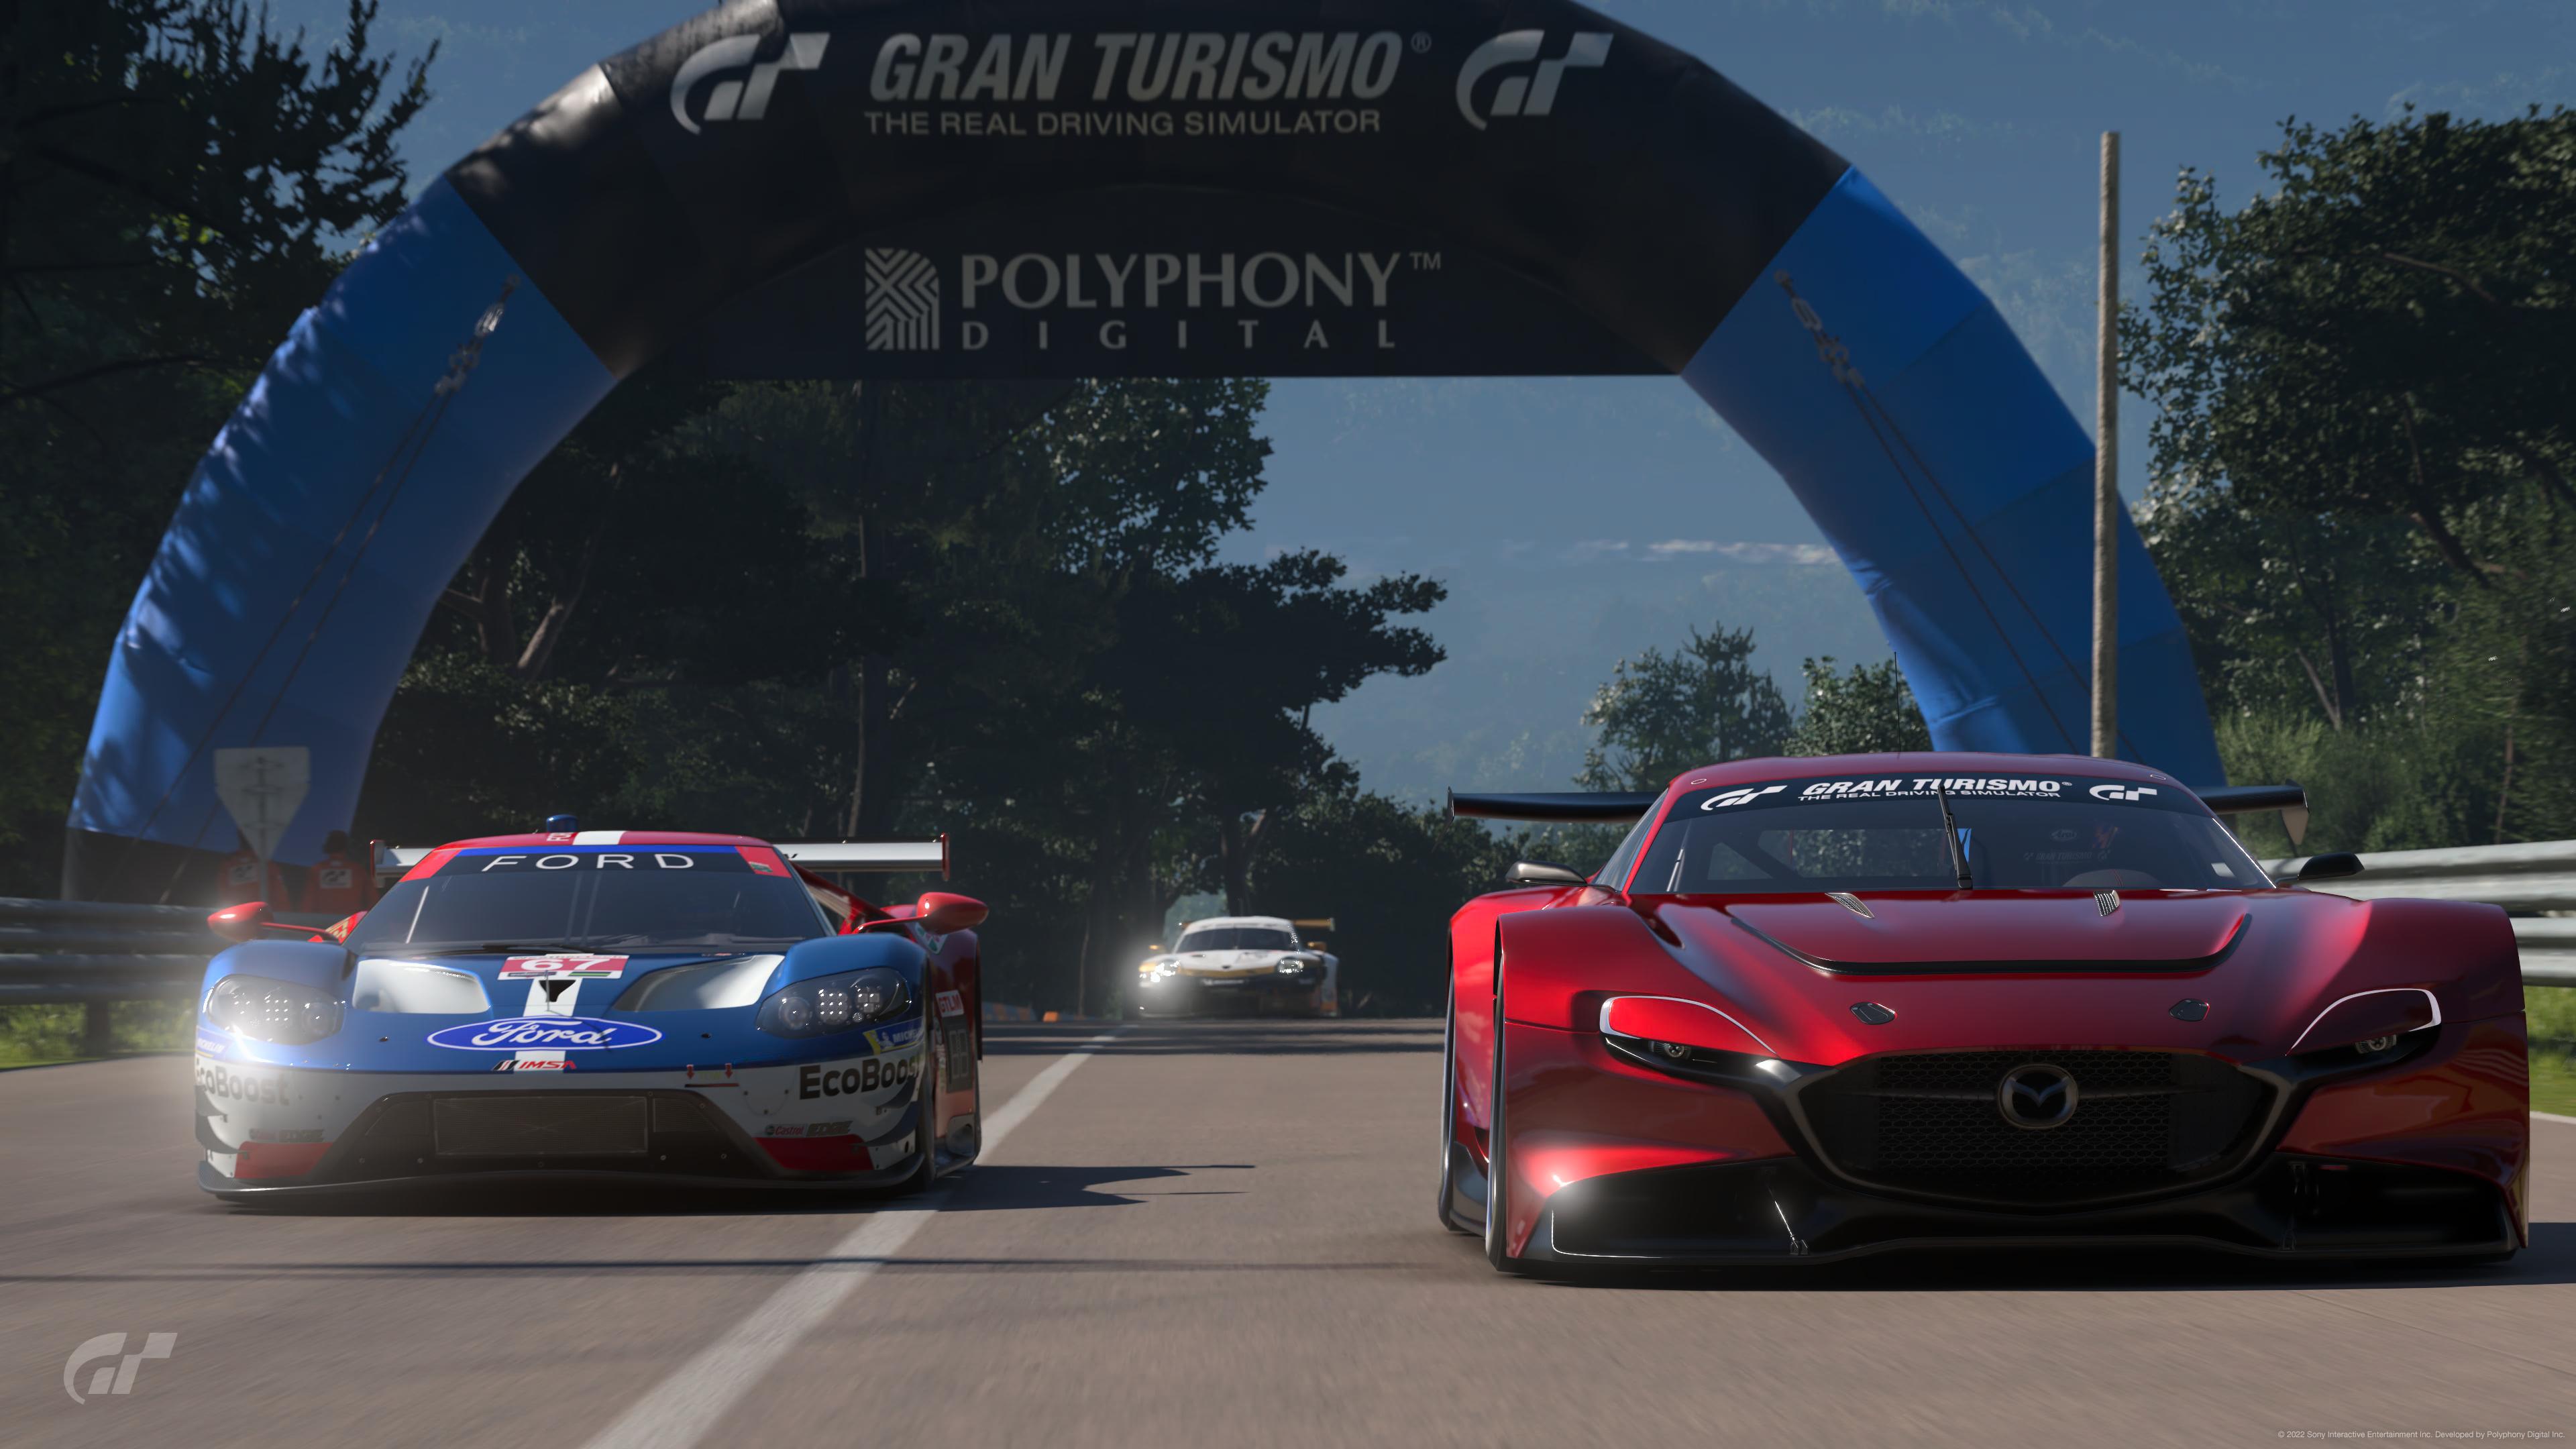 How to raise and lower PP in Gran Turismo 7